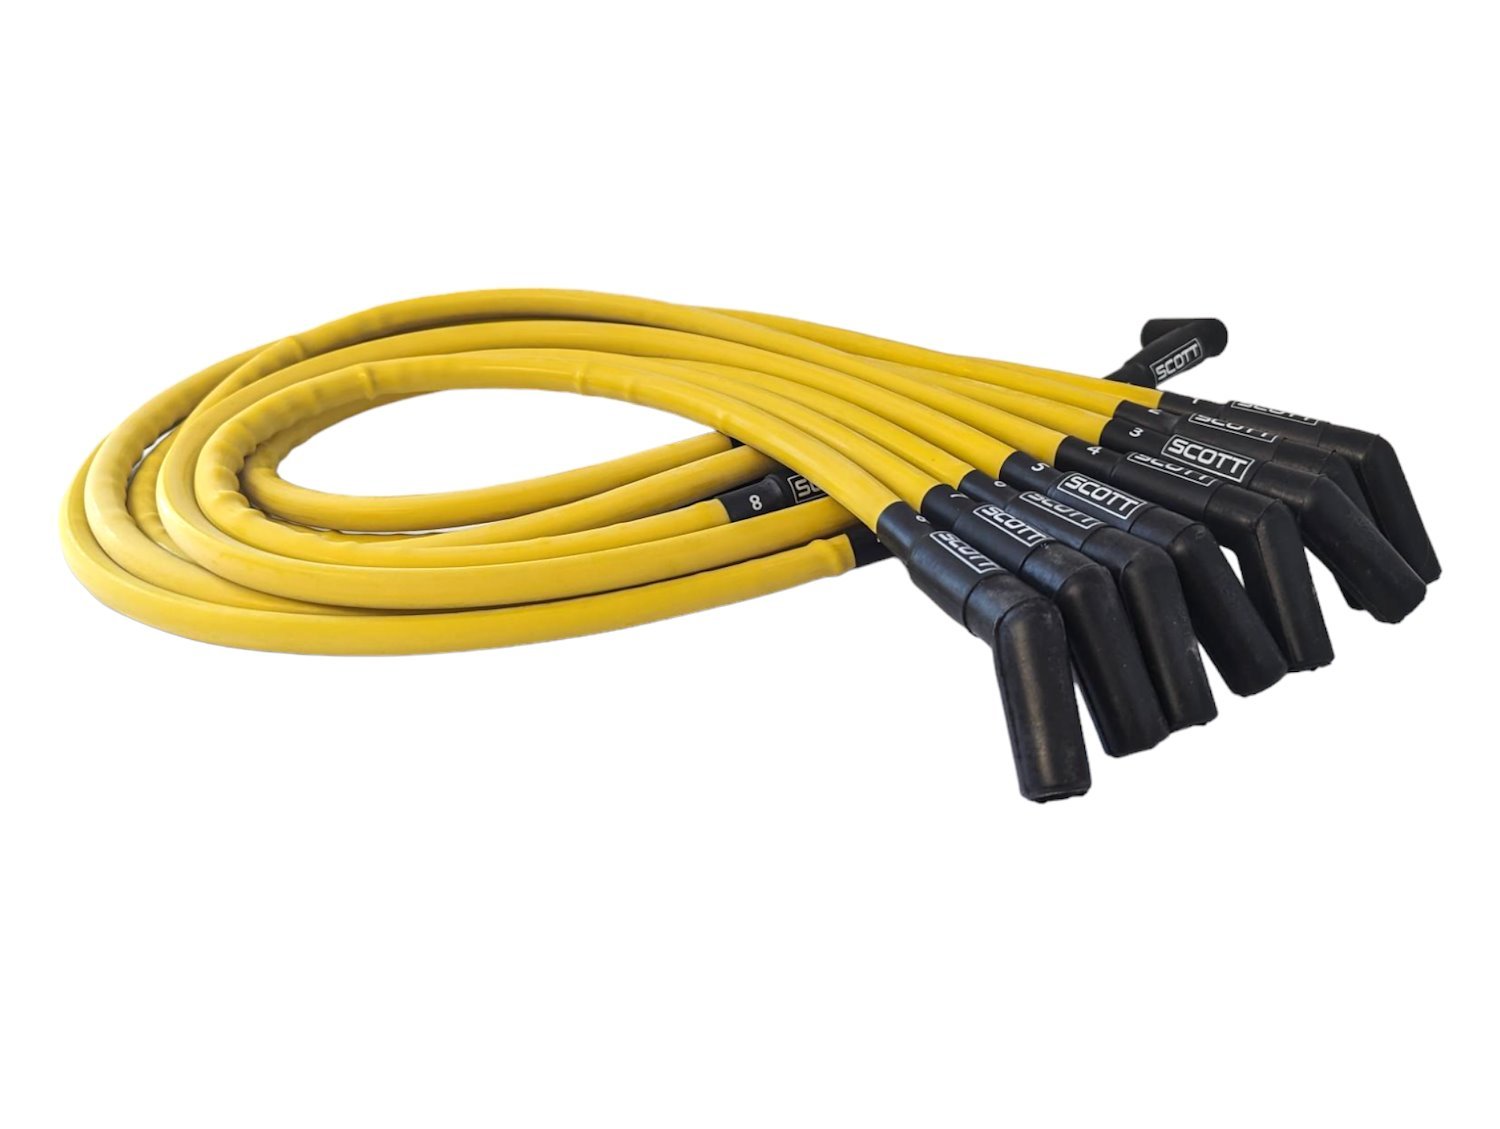 SPW-CH-429-7 High-Performance Silicone-Sleeved Spark Plug Wire Set for Big Block Ford, Over Valve Cover [Yellow]